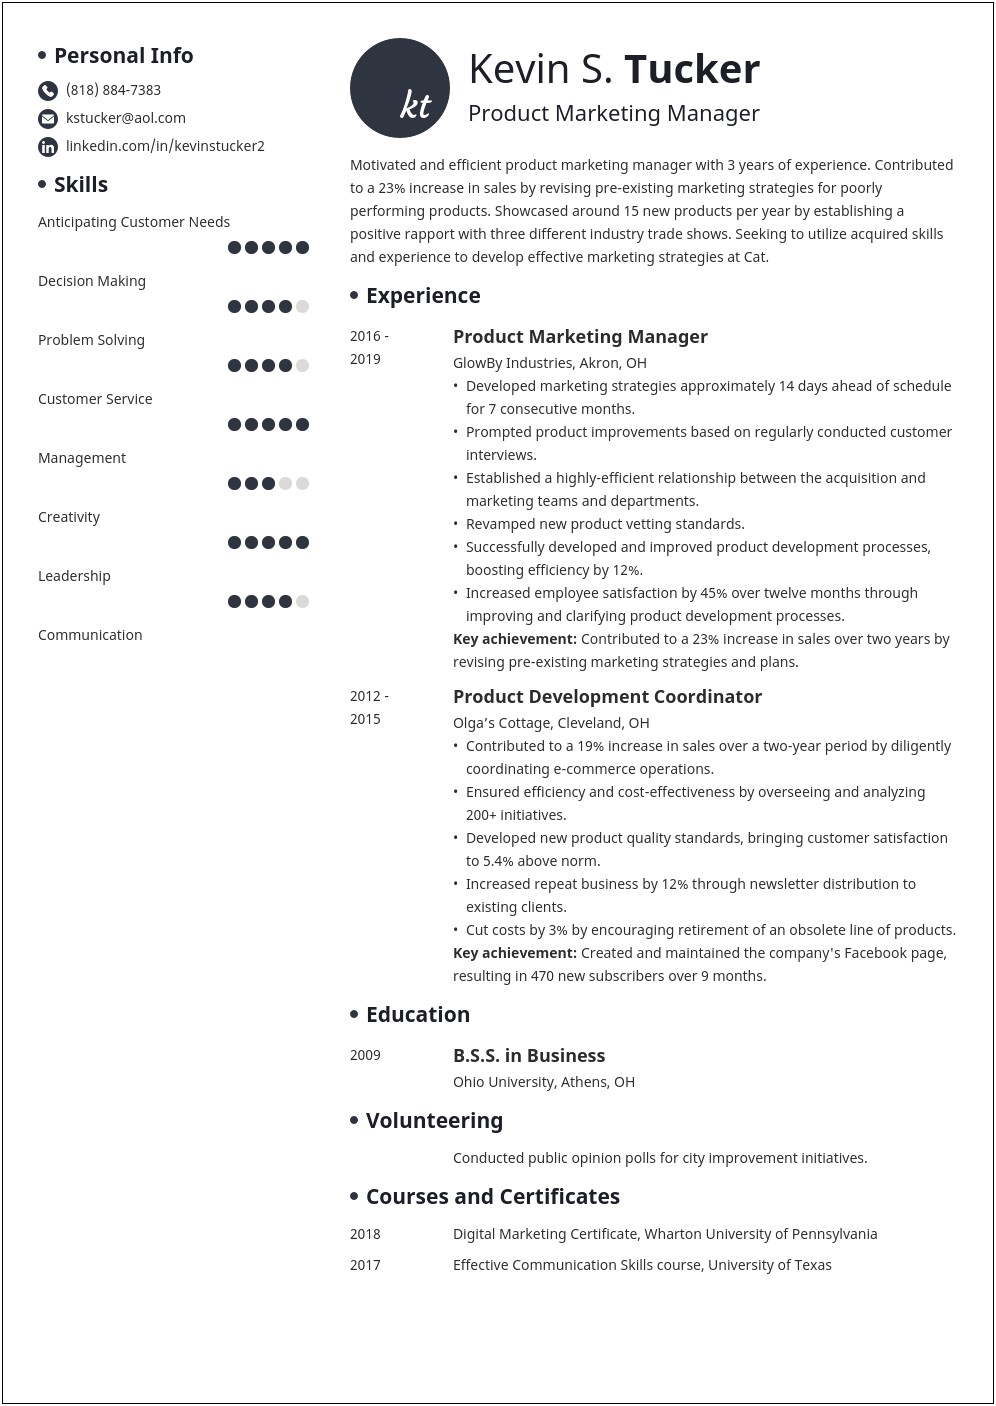 Product Marketing Manager Resume Value Proposition